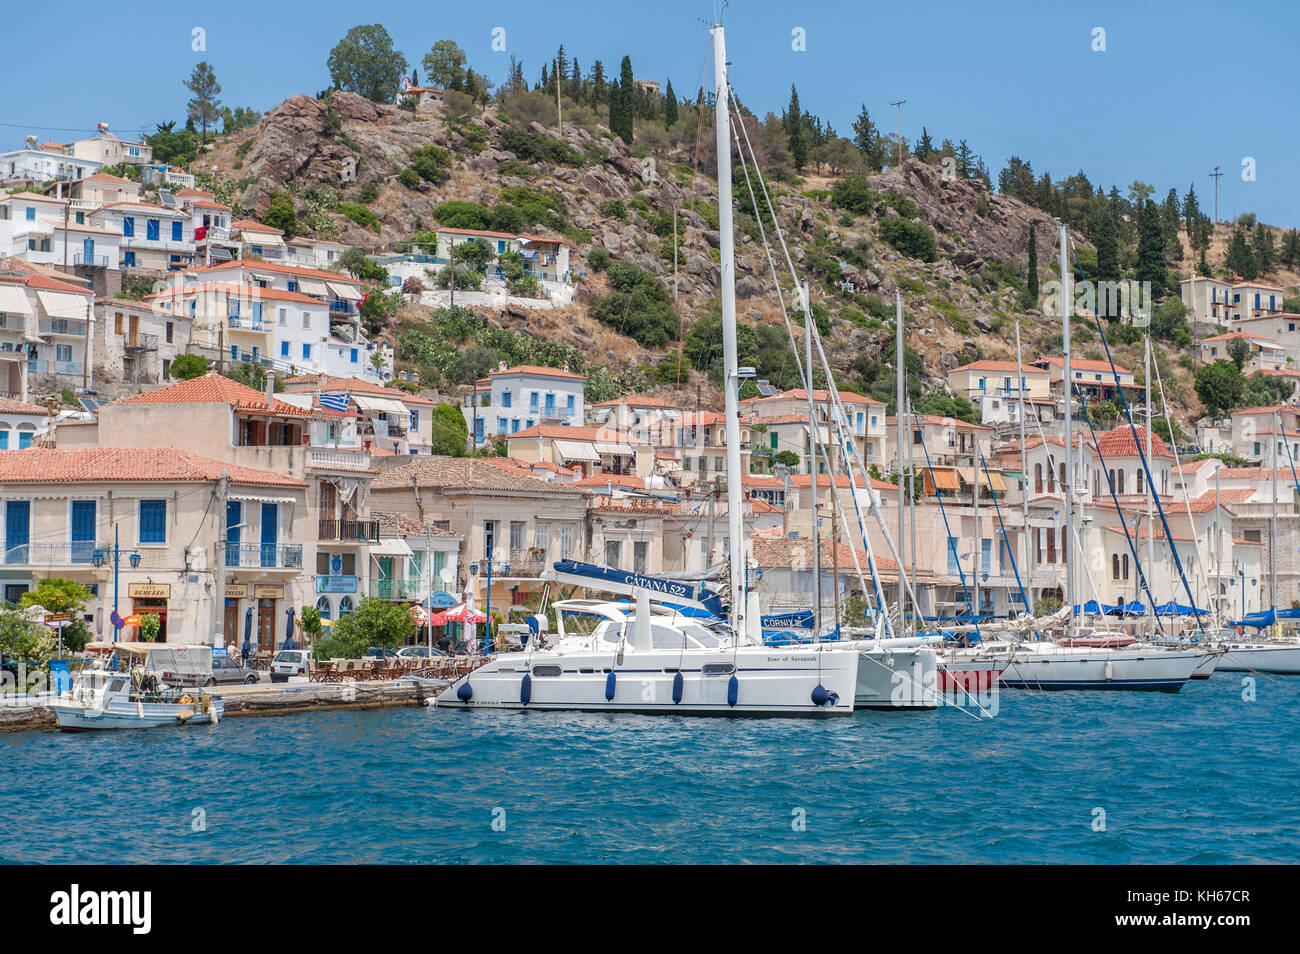 Poros on a sunny day. Poros is a small Greek island in the Aegean sea belonging to the Saronic islands. Stock Photo